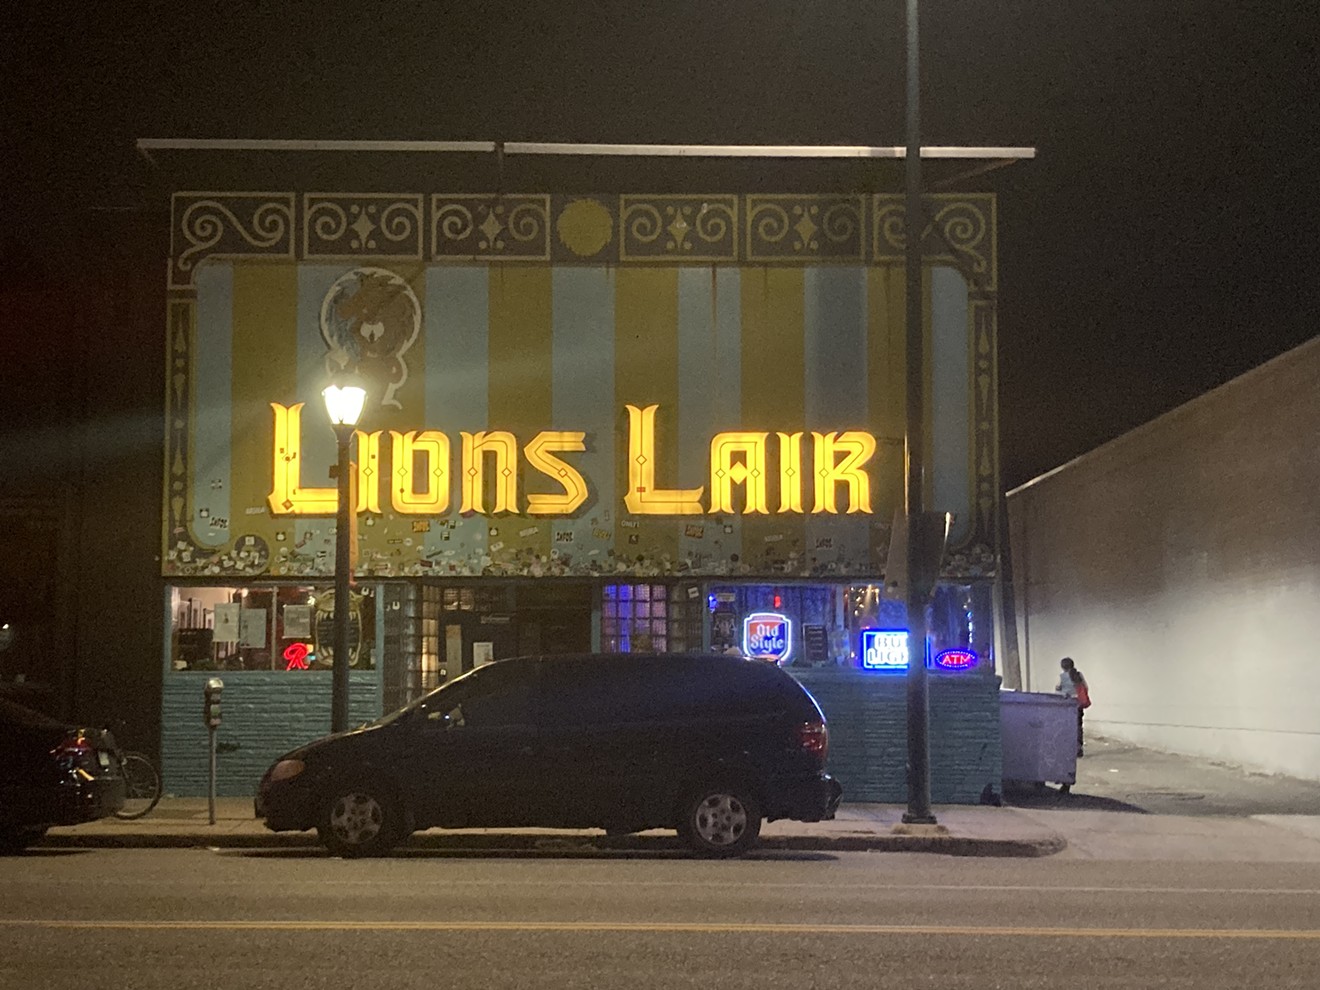 The goal is to bolster the many bars and restaurants on Colfax like the Lion's Lair with new development.